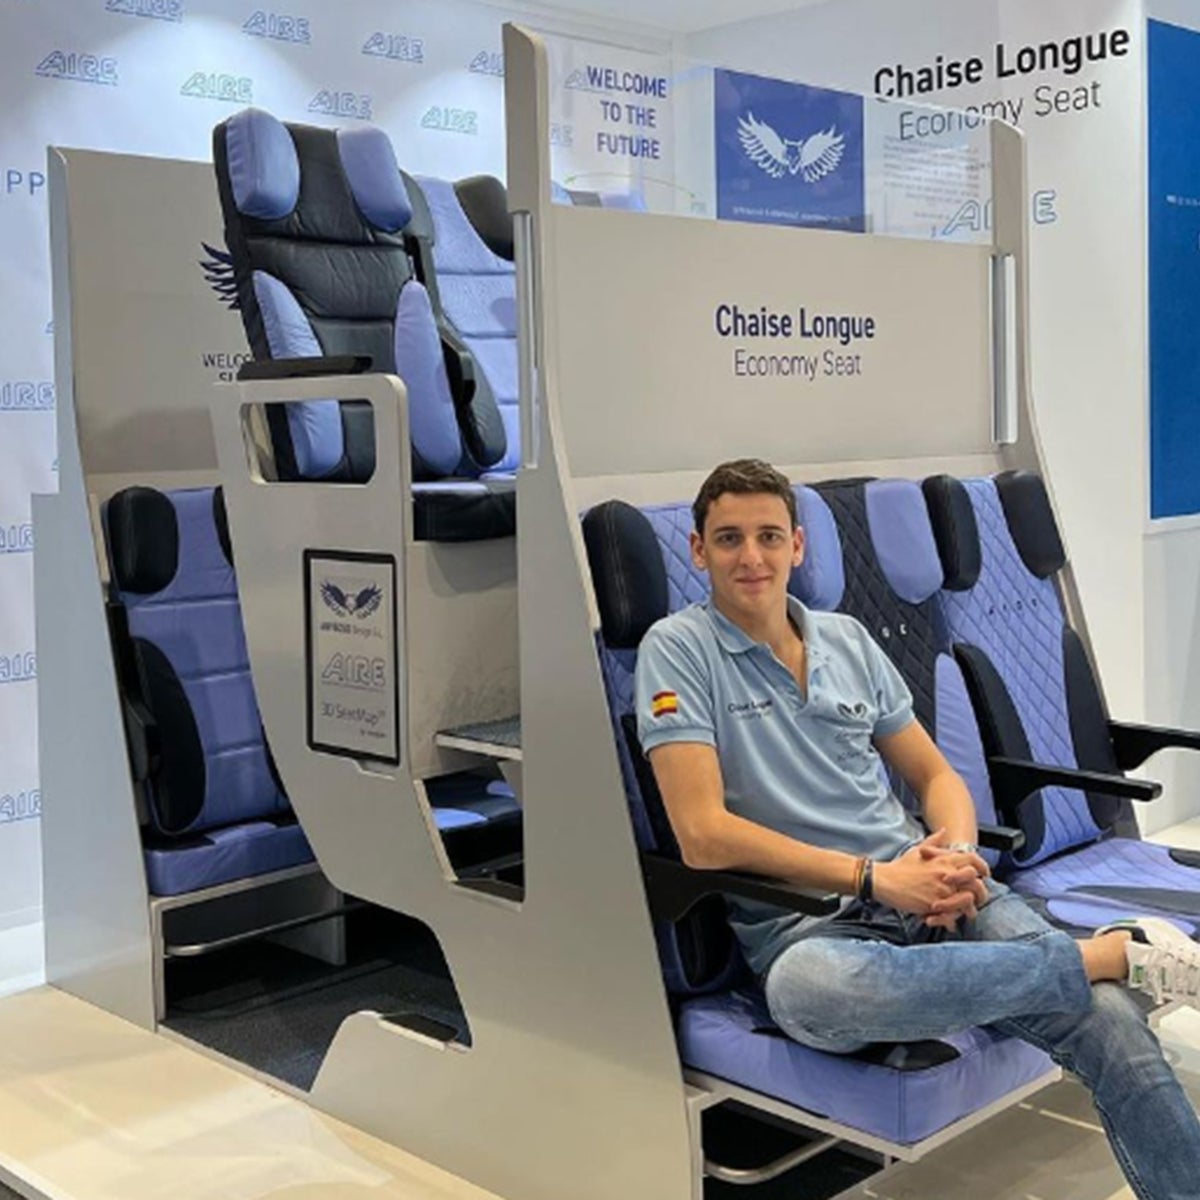 Double-decker plane seat unveiled – and it's sparking furious